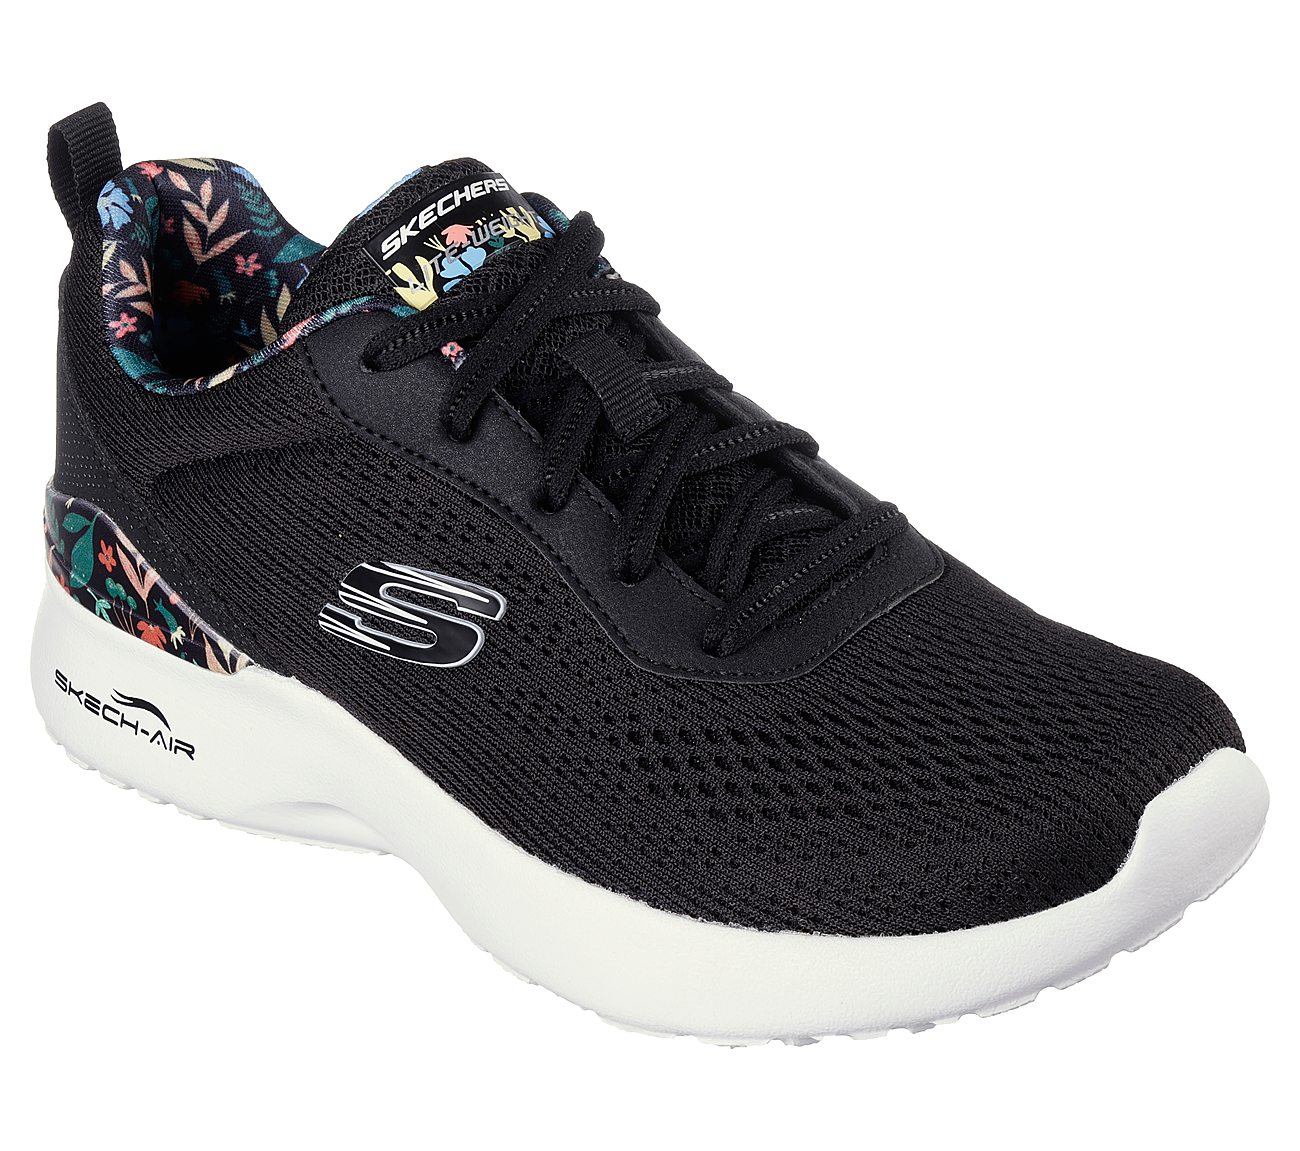 SKECH-AIR DYNAMIGHT-LAID OUT, BLACK/MULTI Footwear Right View